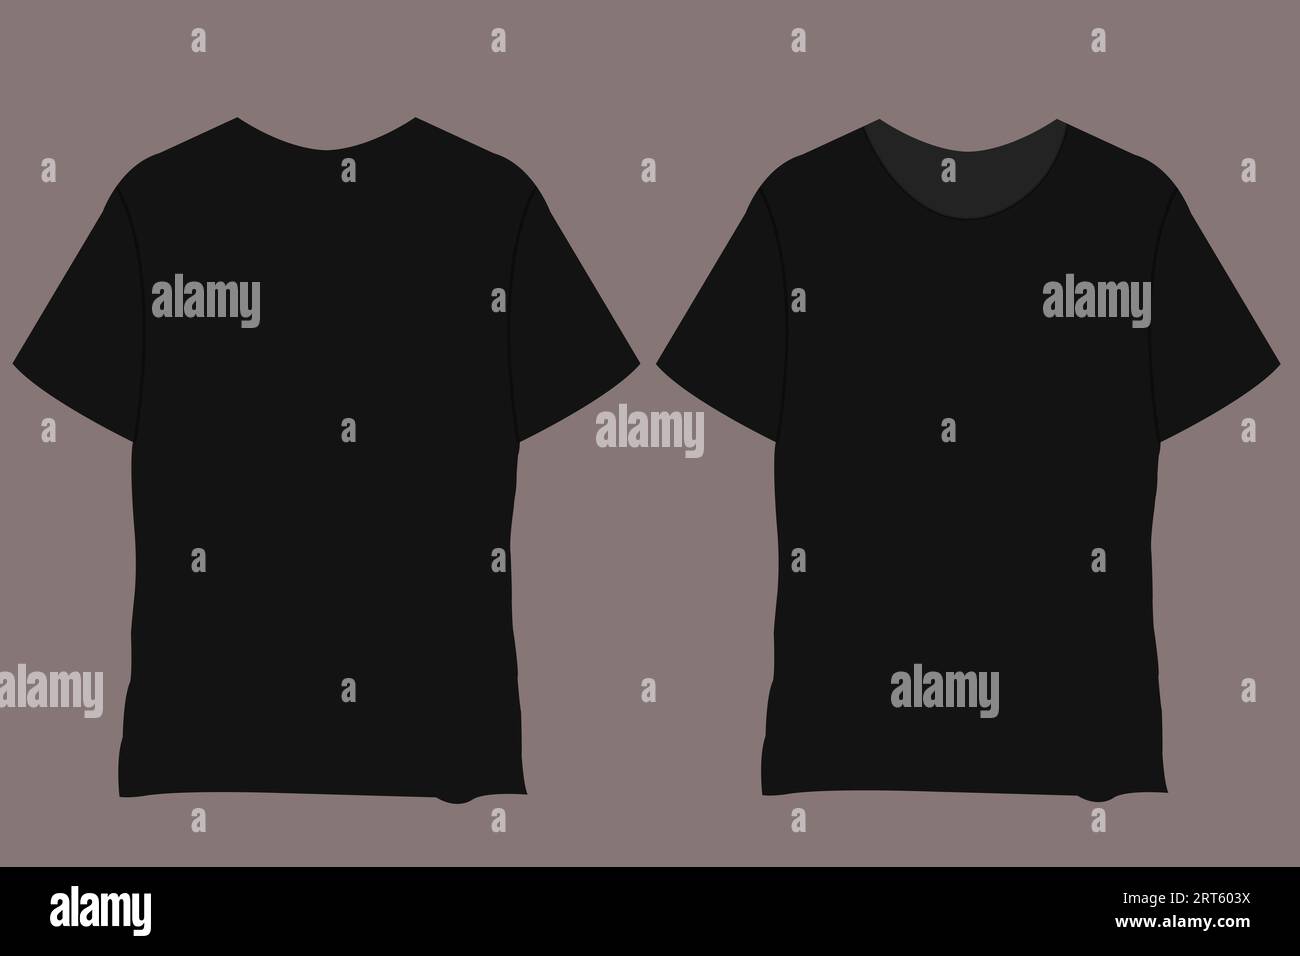 TShirt Mockup vector template. Blank Black T-Shirts Front view presentation for print. Men's black Mock-up Ready to replace design. Short sleeve casua Stock Vector